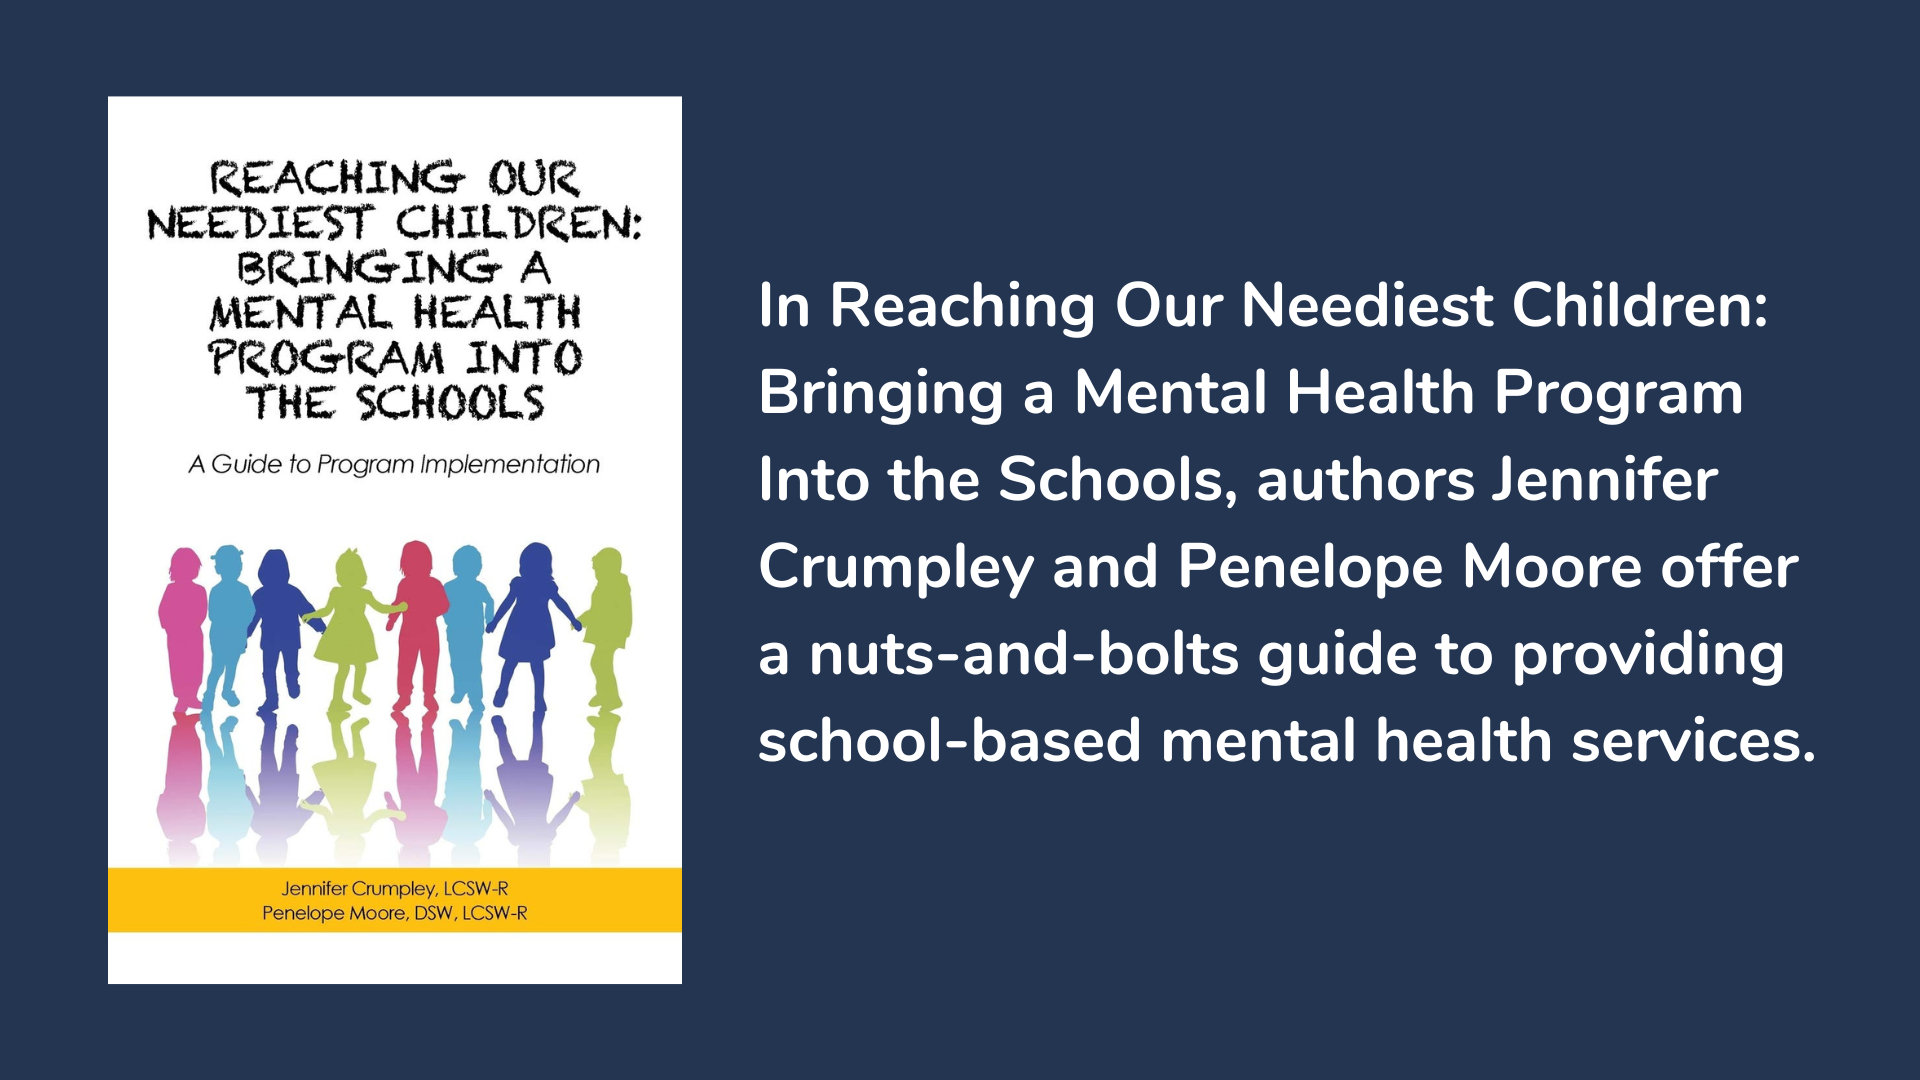 Reaching Our Neediest Children: Bringing a Mental Health Program into the Schools, book cover and description